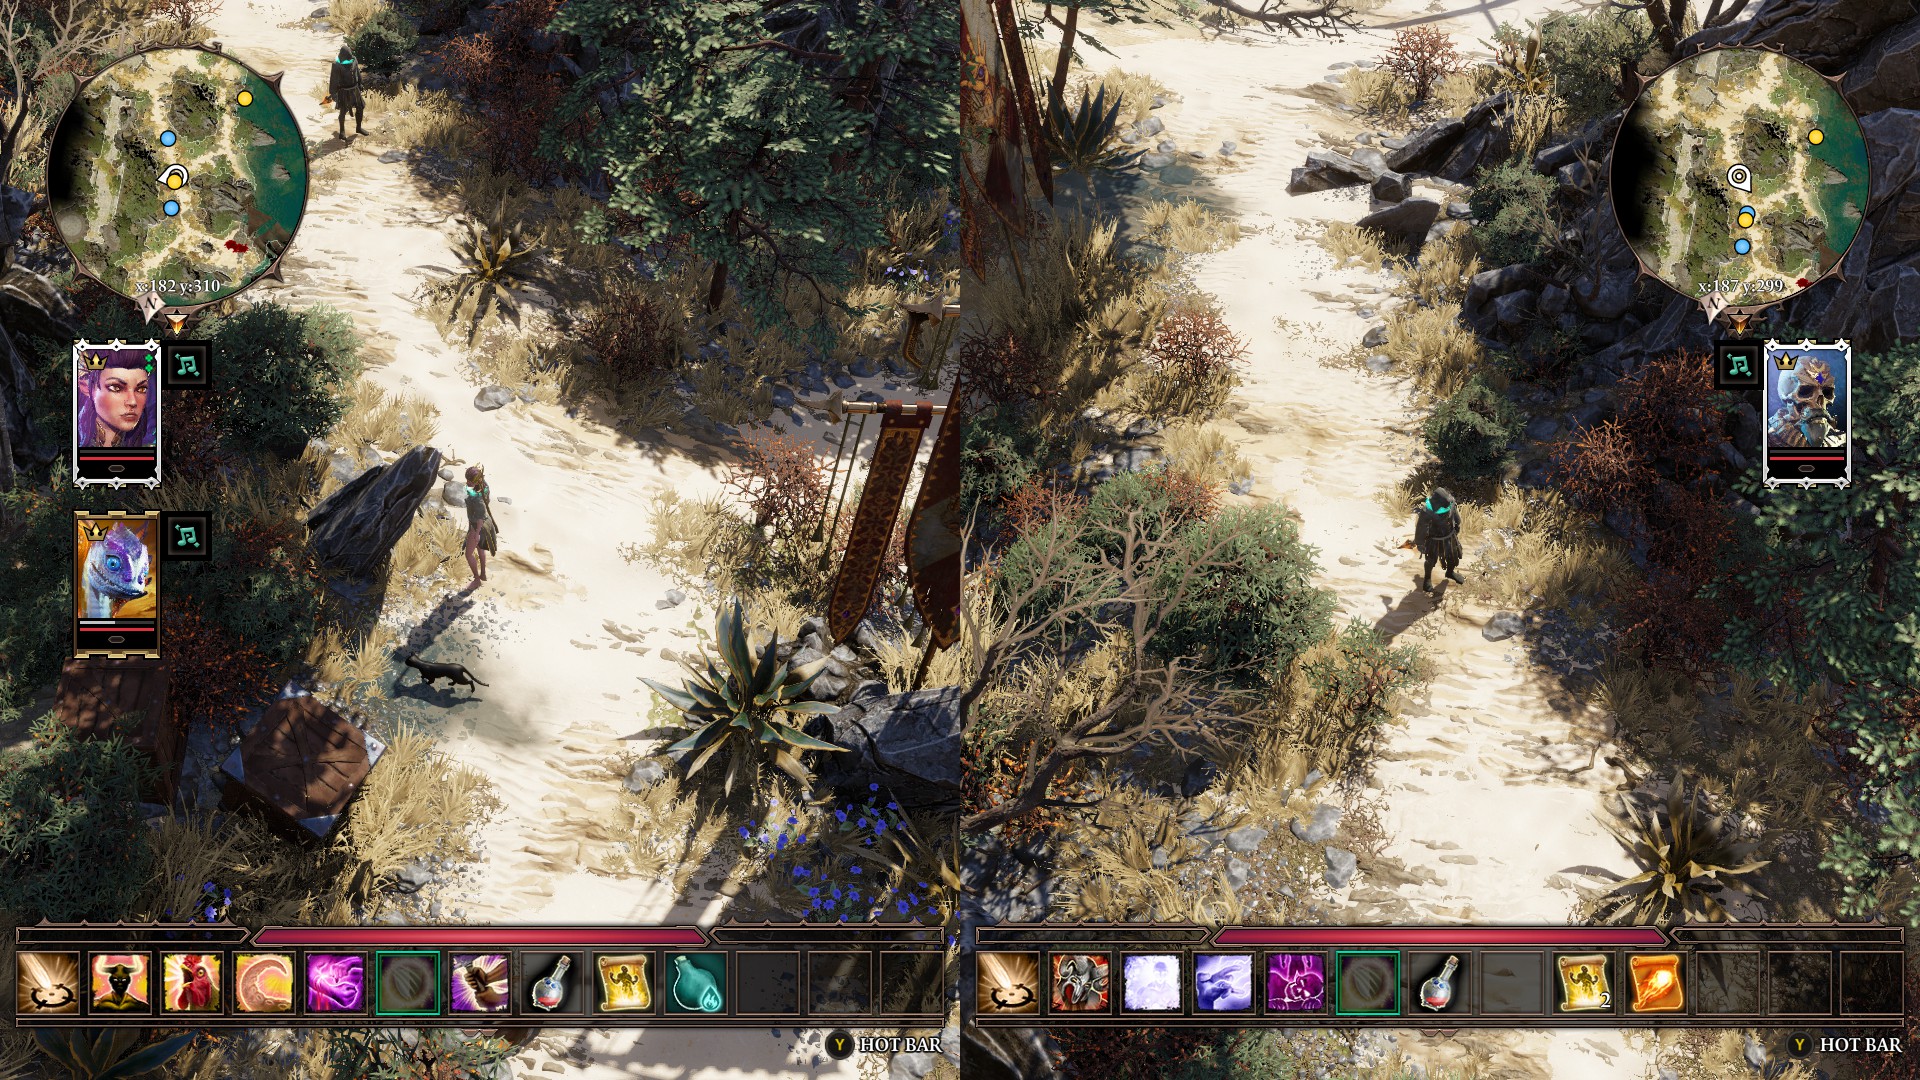 Divinity Original Sin Games 4 players Local Co-op. : r/localmultiplayergames